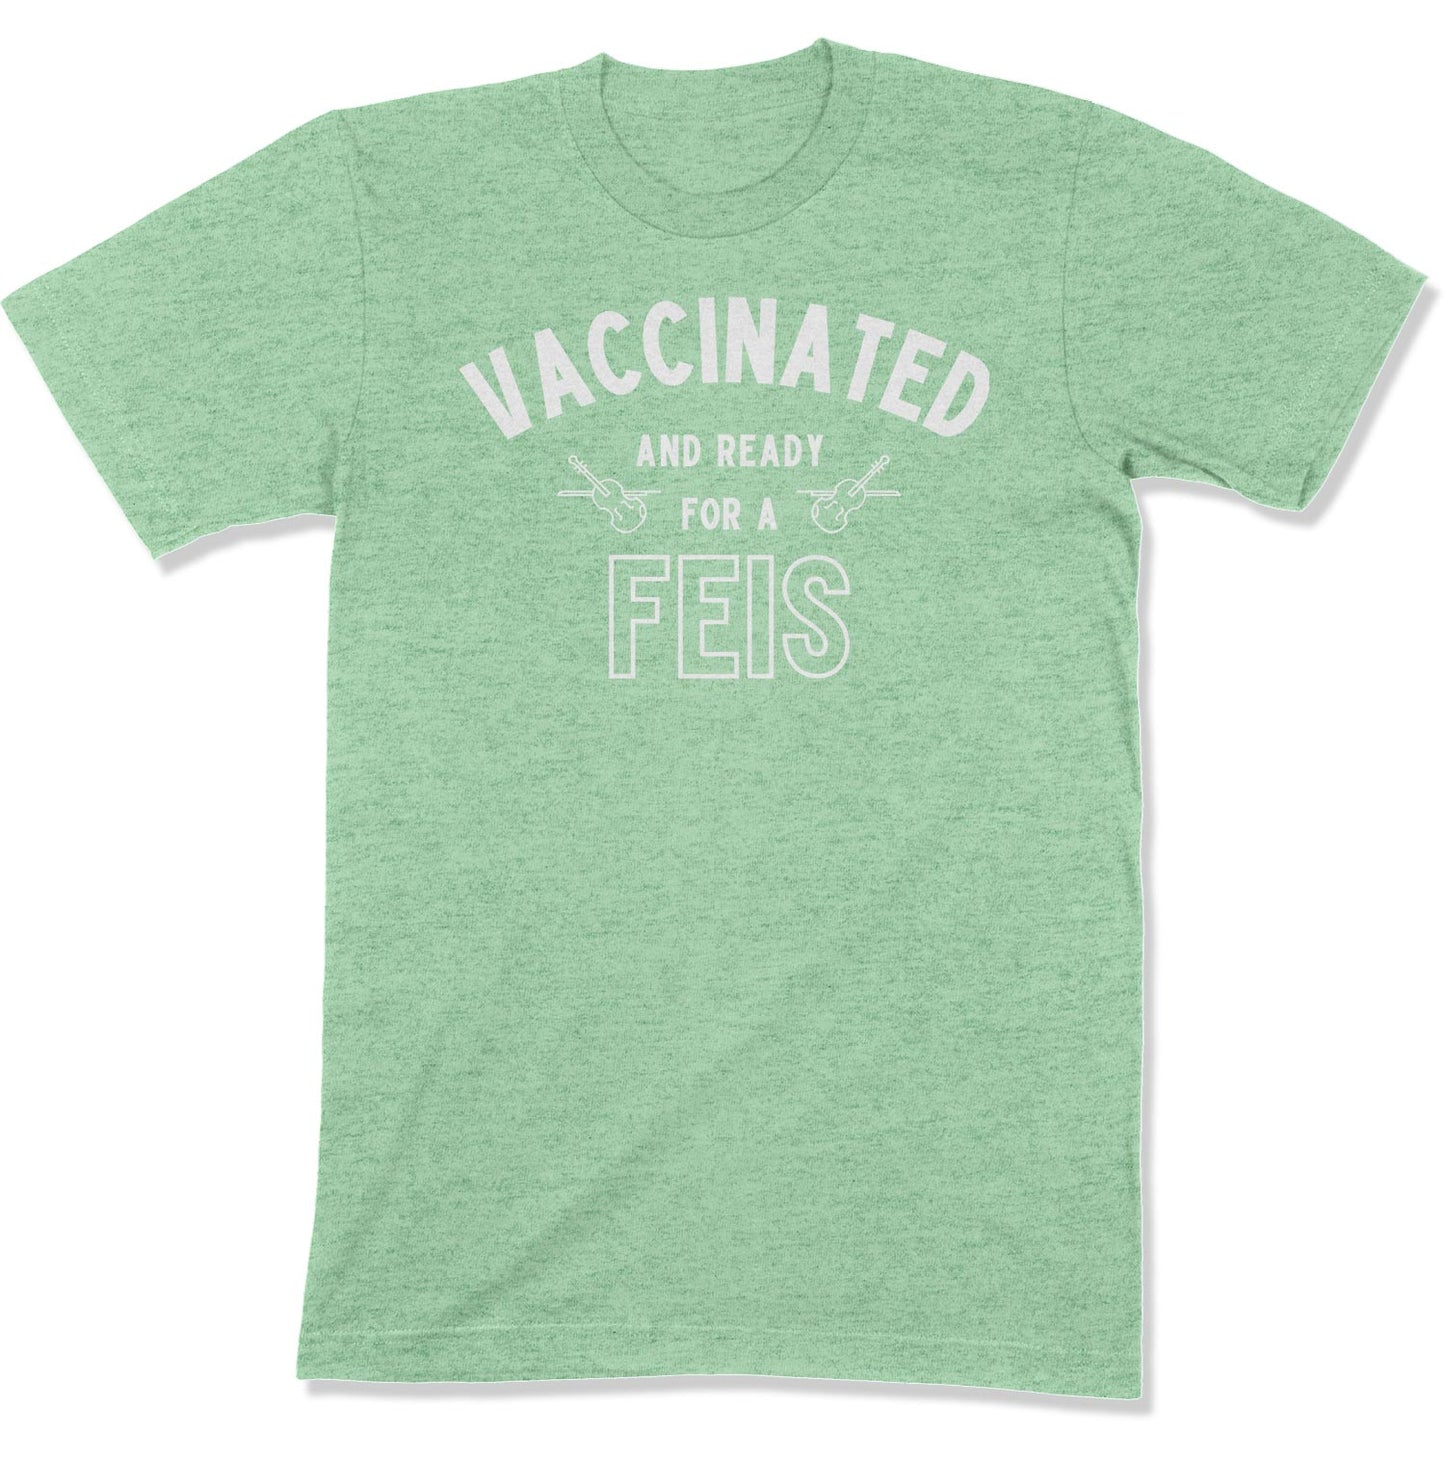 Vaccinated and Ready for a Feis-East Coast AF Apparel